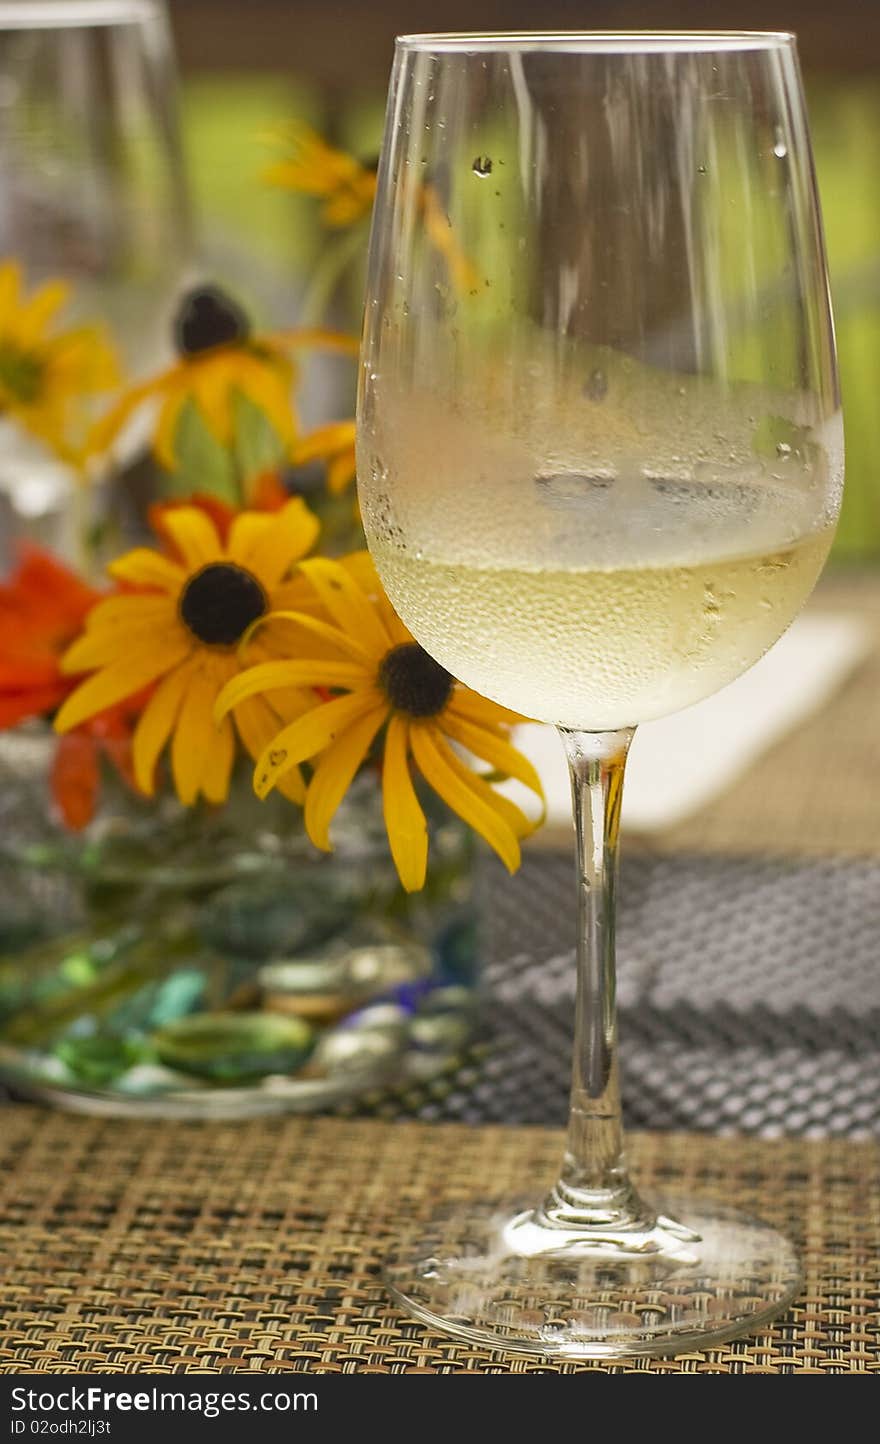 Glass of chilled white wine standing on a rustic mat with yellow flowers on the background